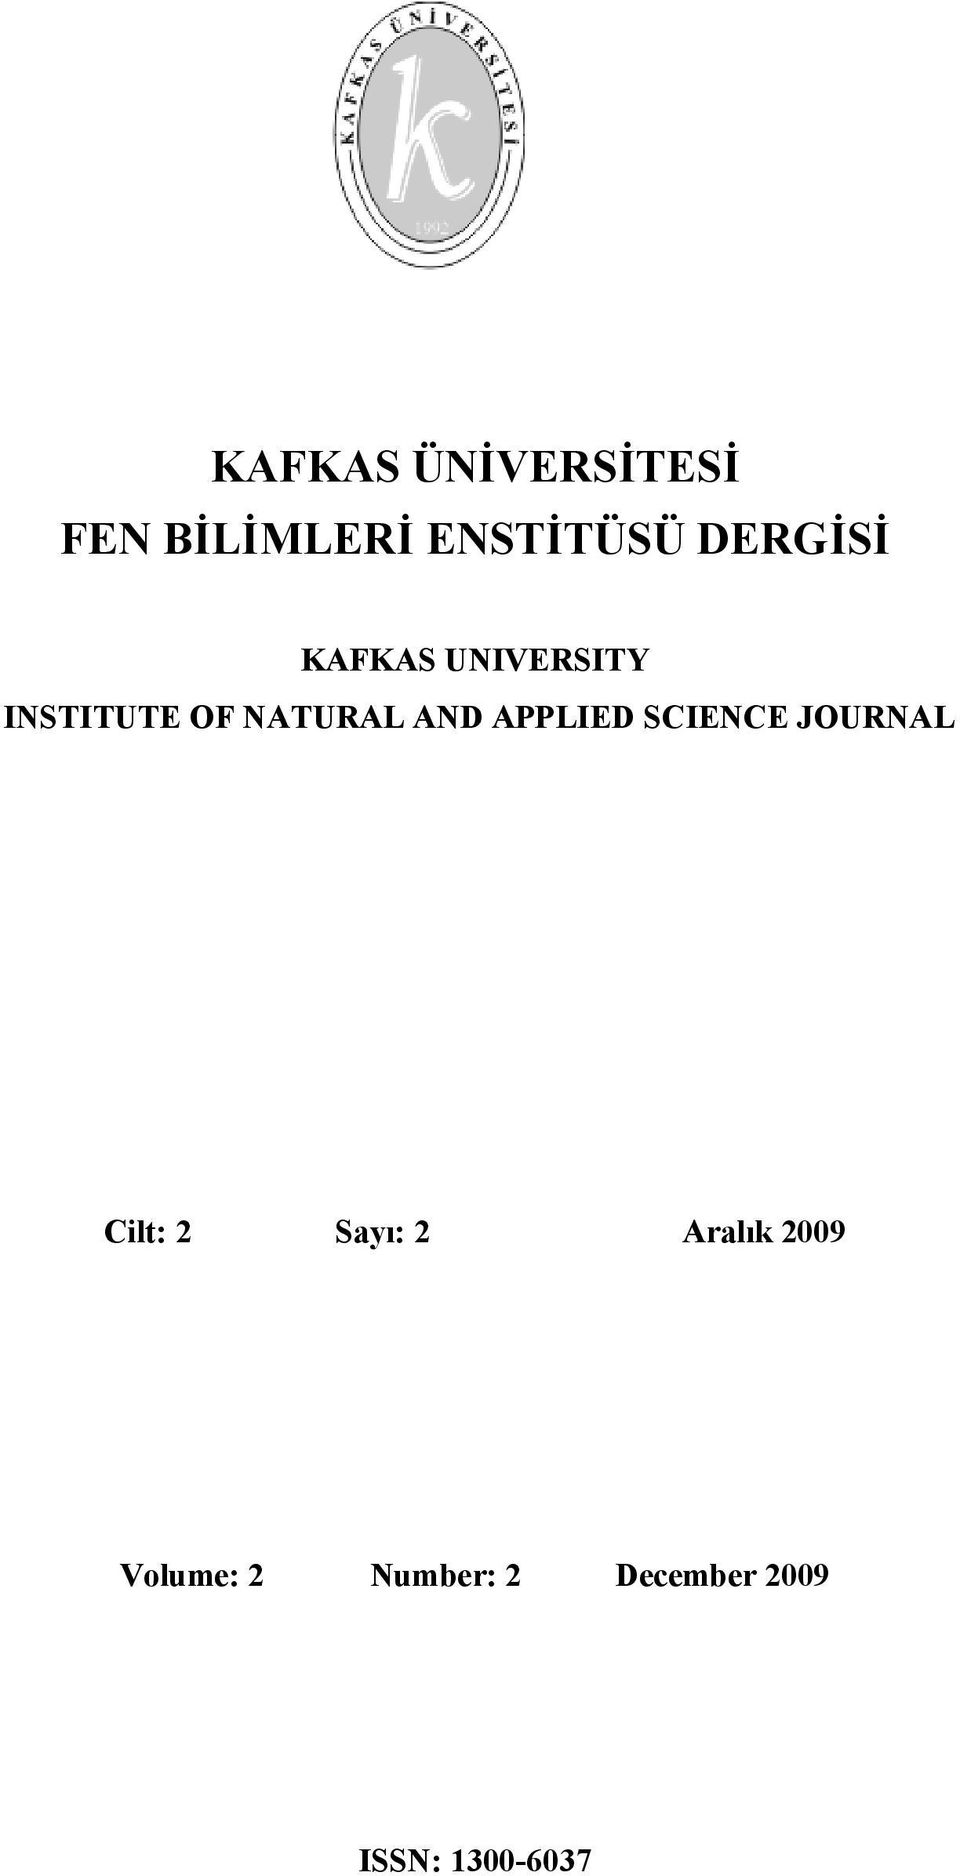 AND APPLIED SCIENCE JOURNAL Cilt: 2 Sayı: 2